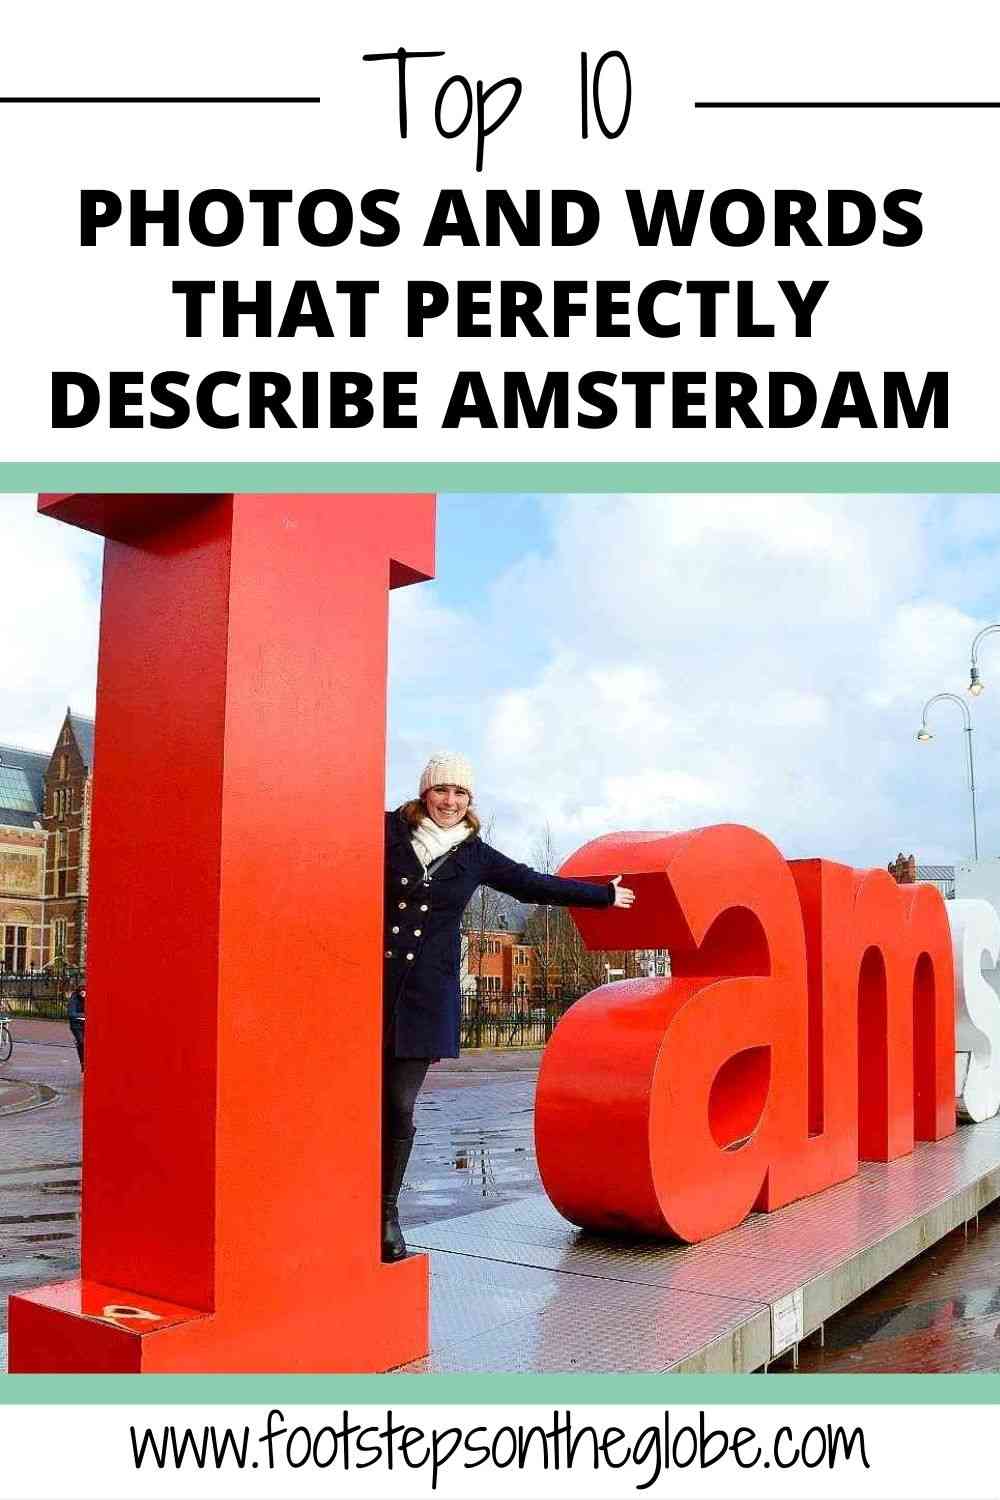 Pinterest image of Mel posing on the I on Amsterdam's famous Iamsterdam sign with the text: "Top 10 photos and words that perfectly describe Amsterdam"